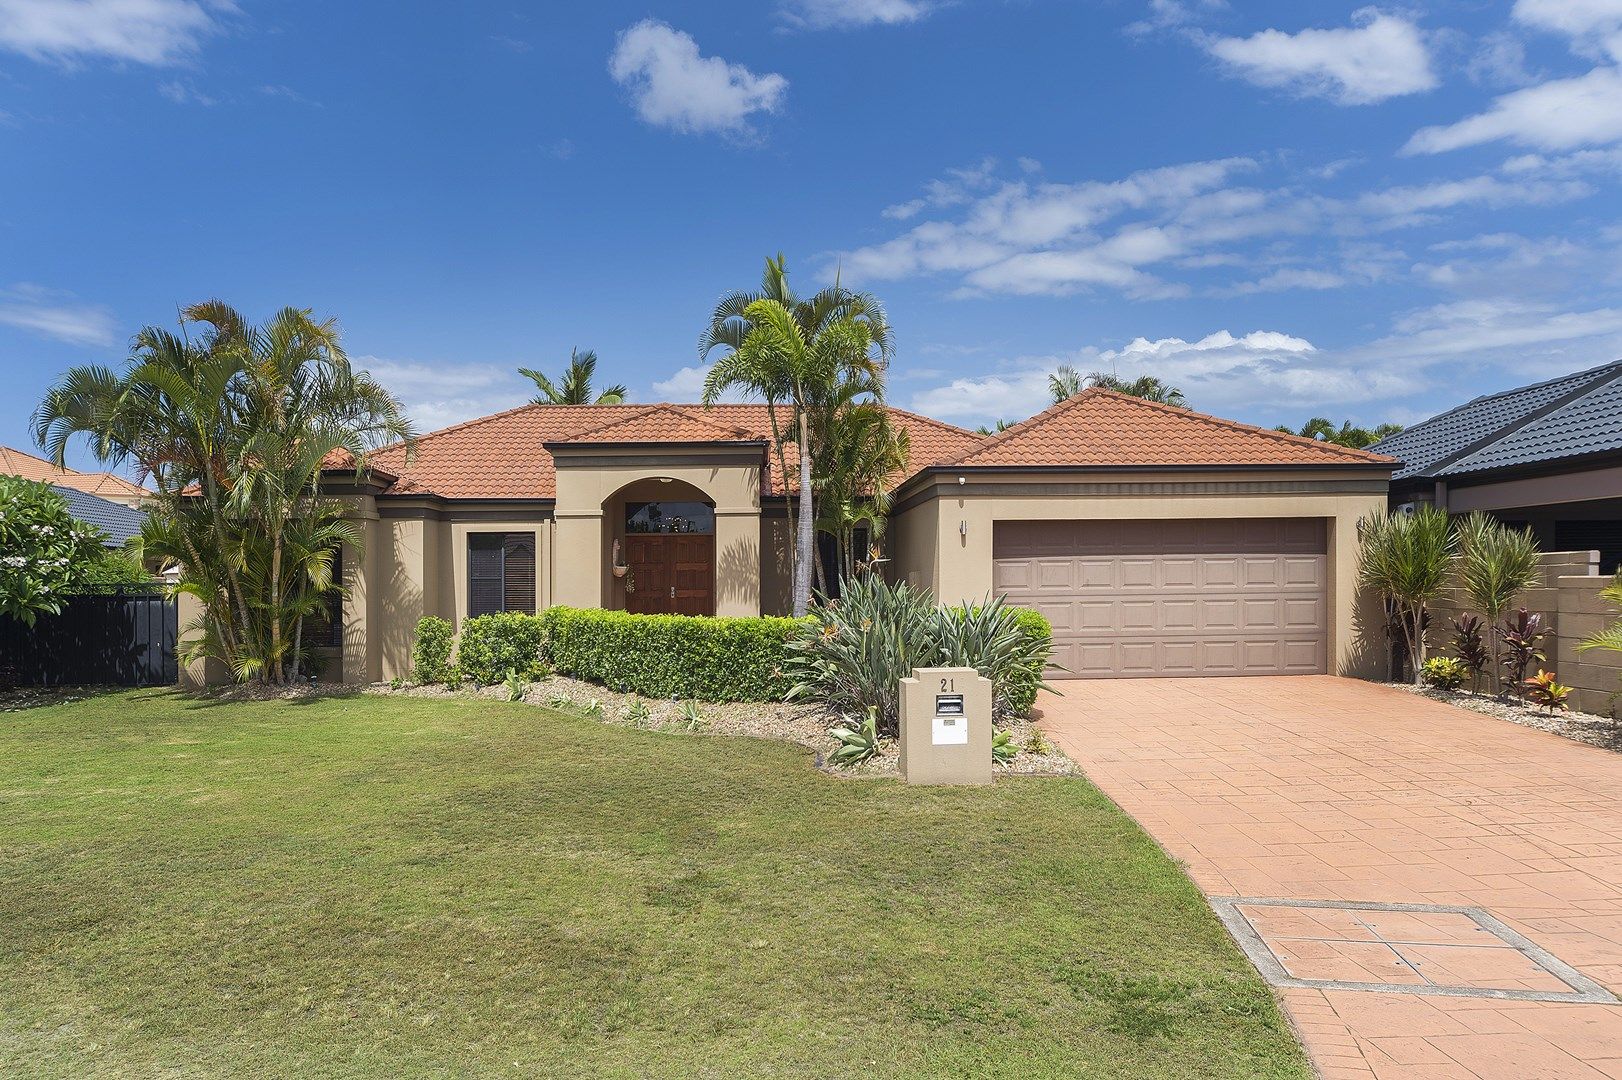 21 John Dalley Drive, Helensvale QLD 4212, Image 0